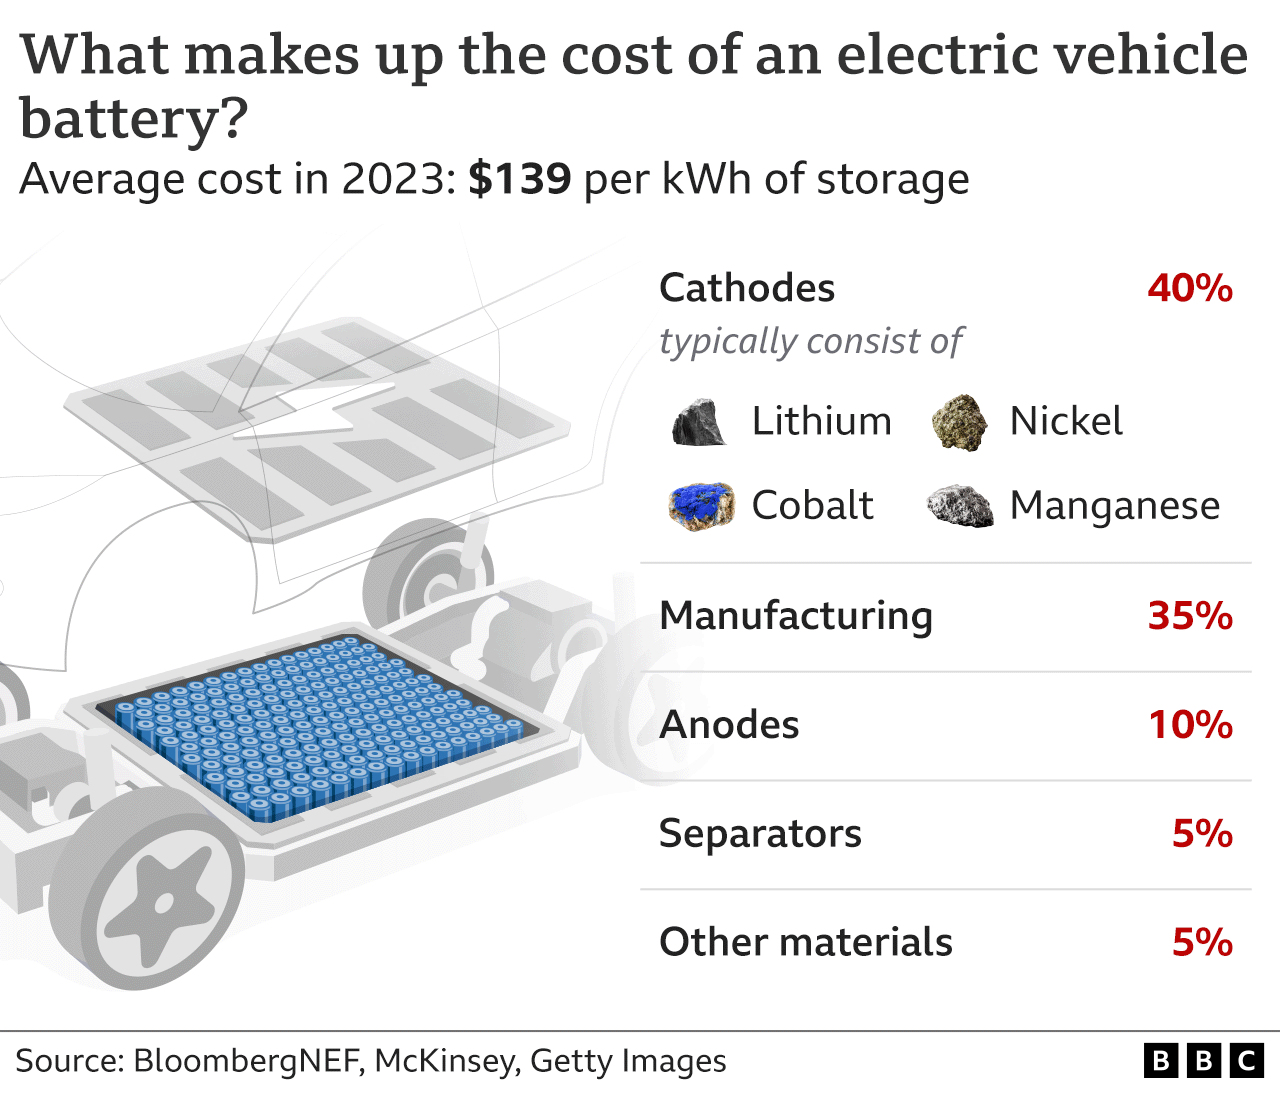 Graphic showing the components in a typical lithium-ion battery and relative costs.